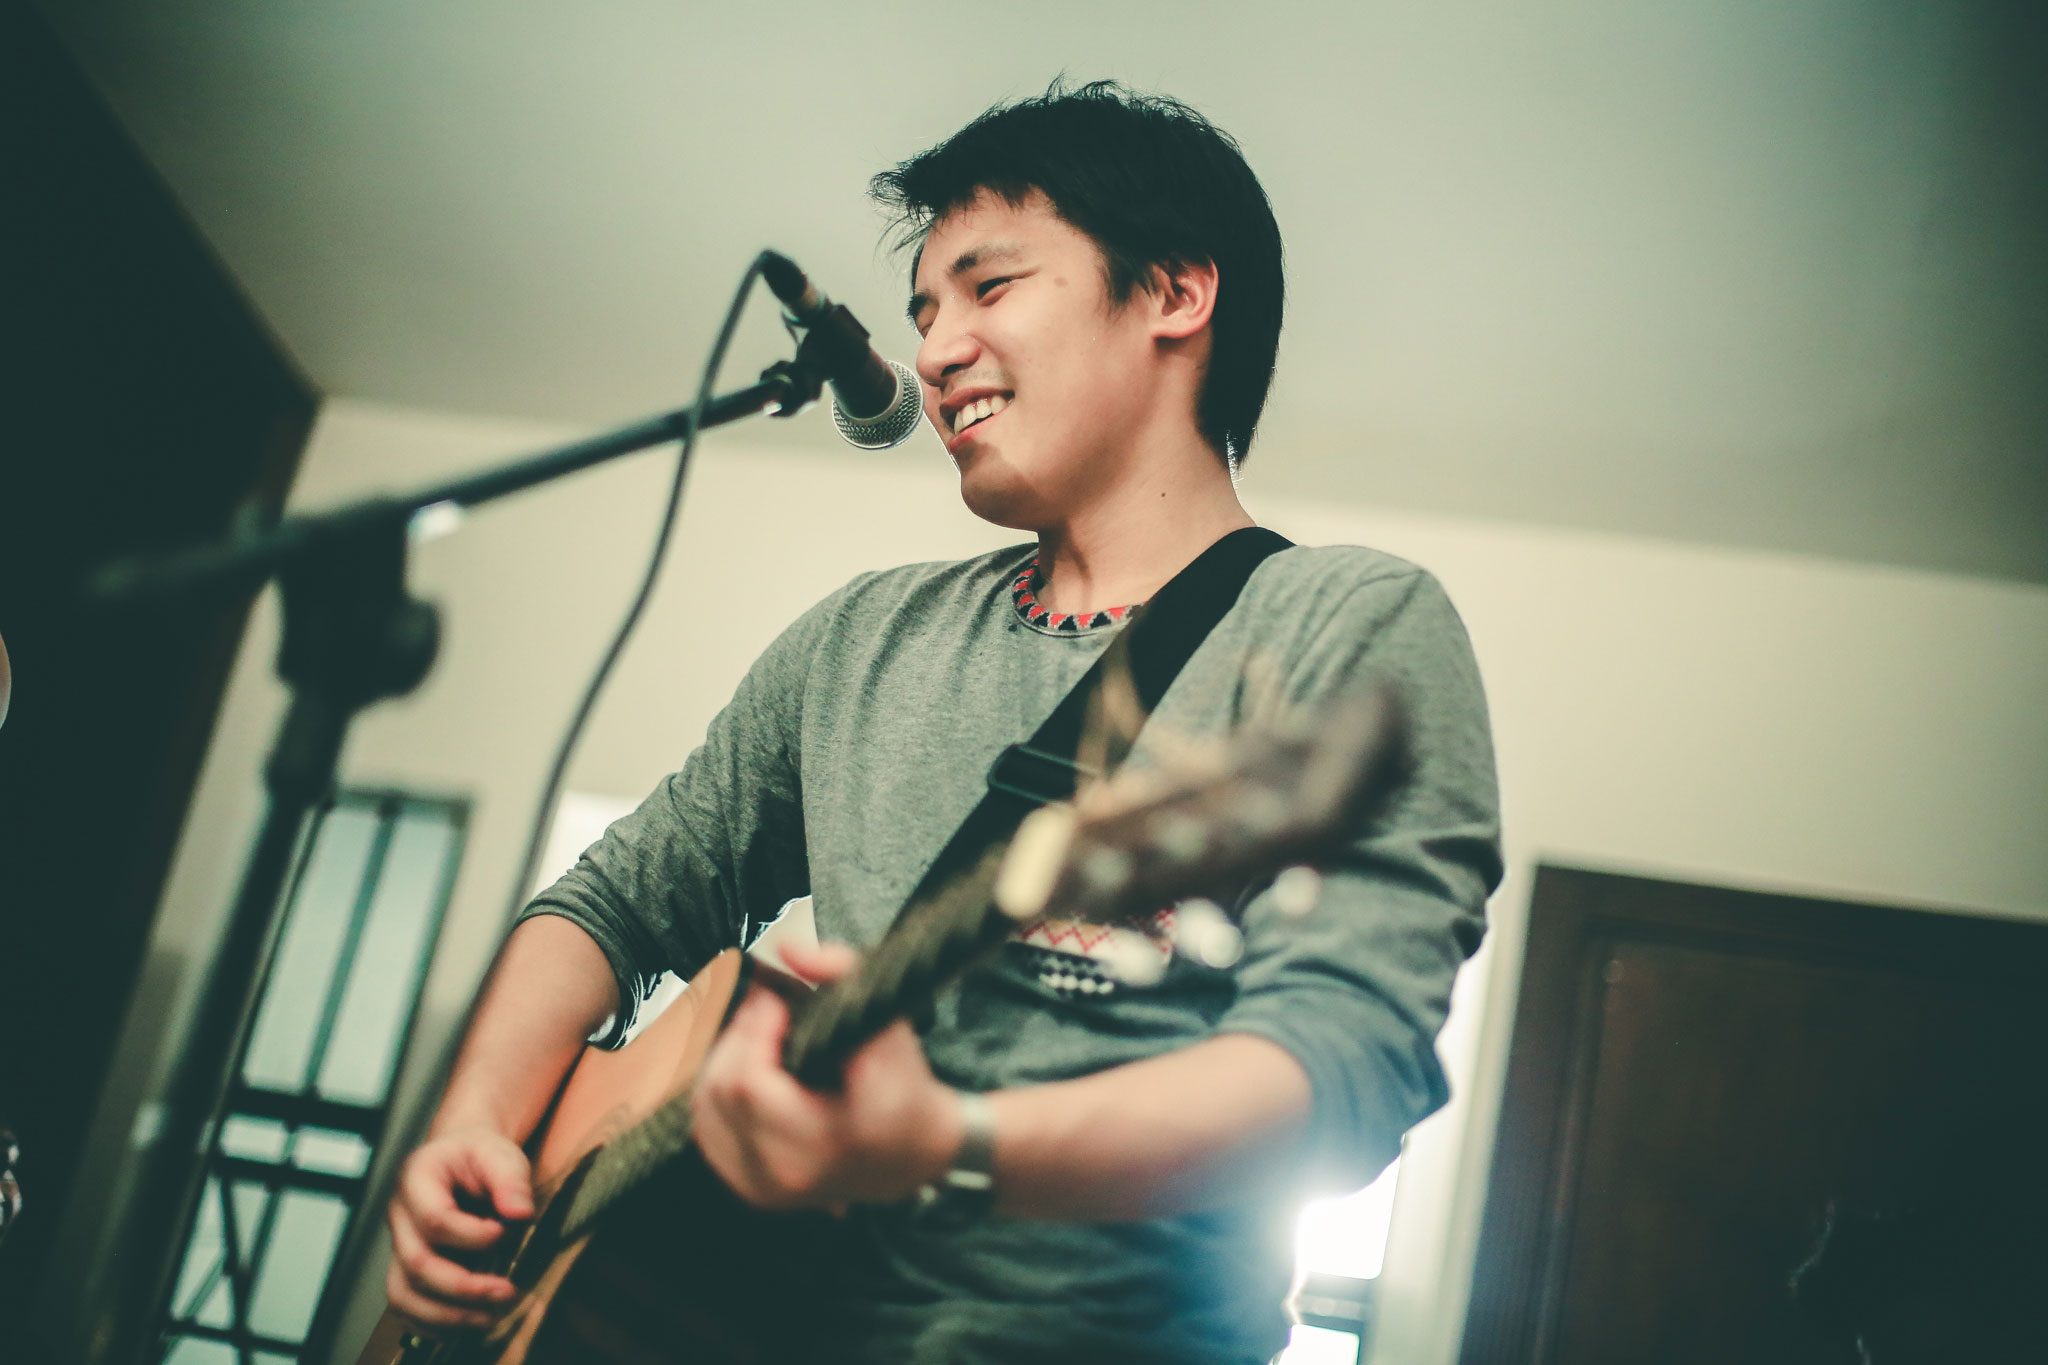 JIM BACARRO. Part of the group Cheats, which performed at the recent Sofar gig